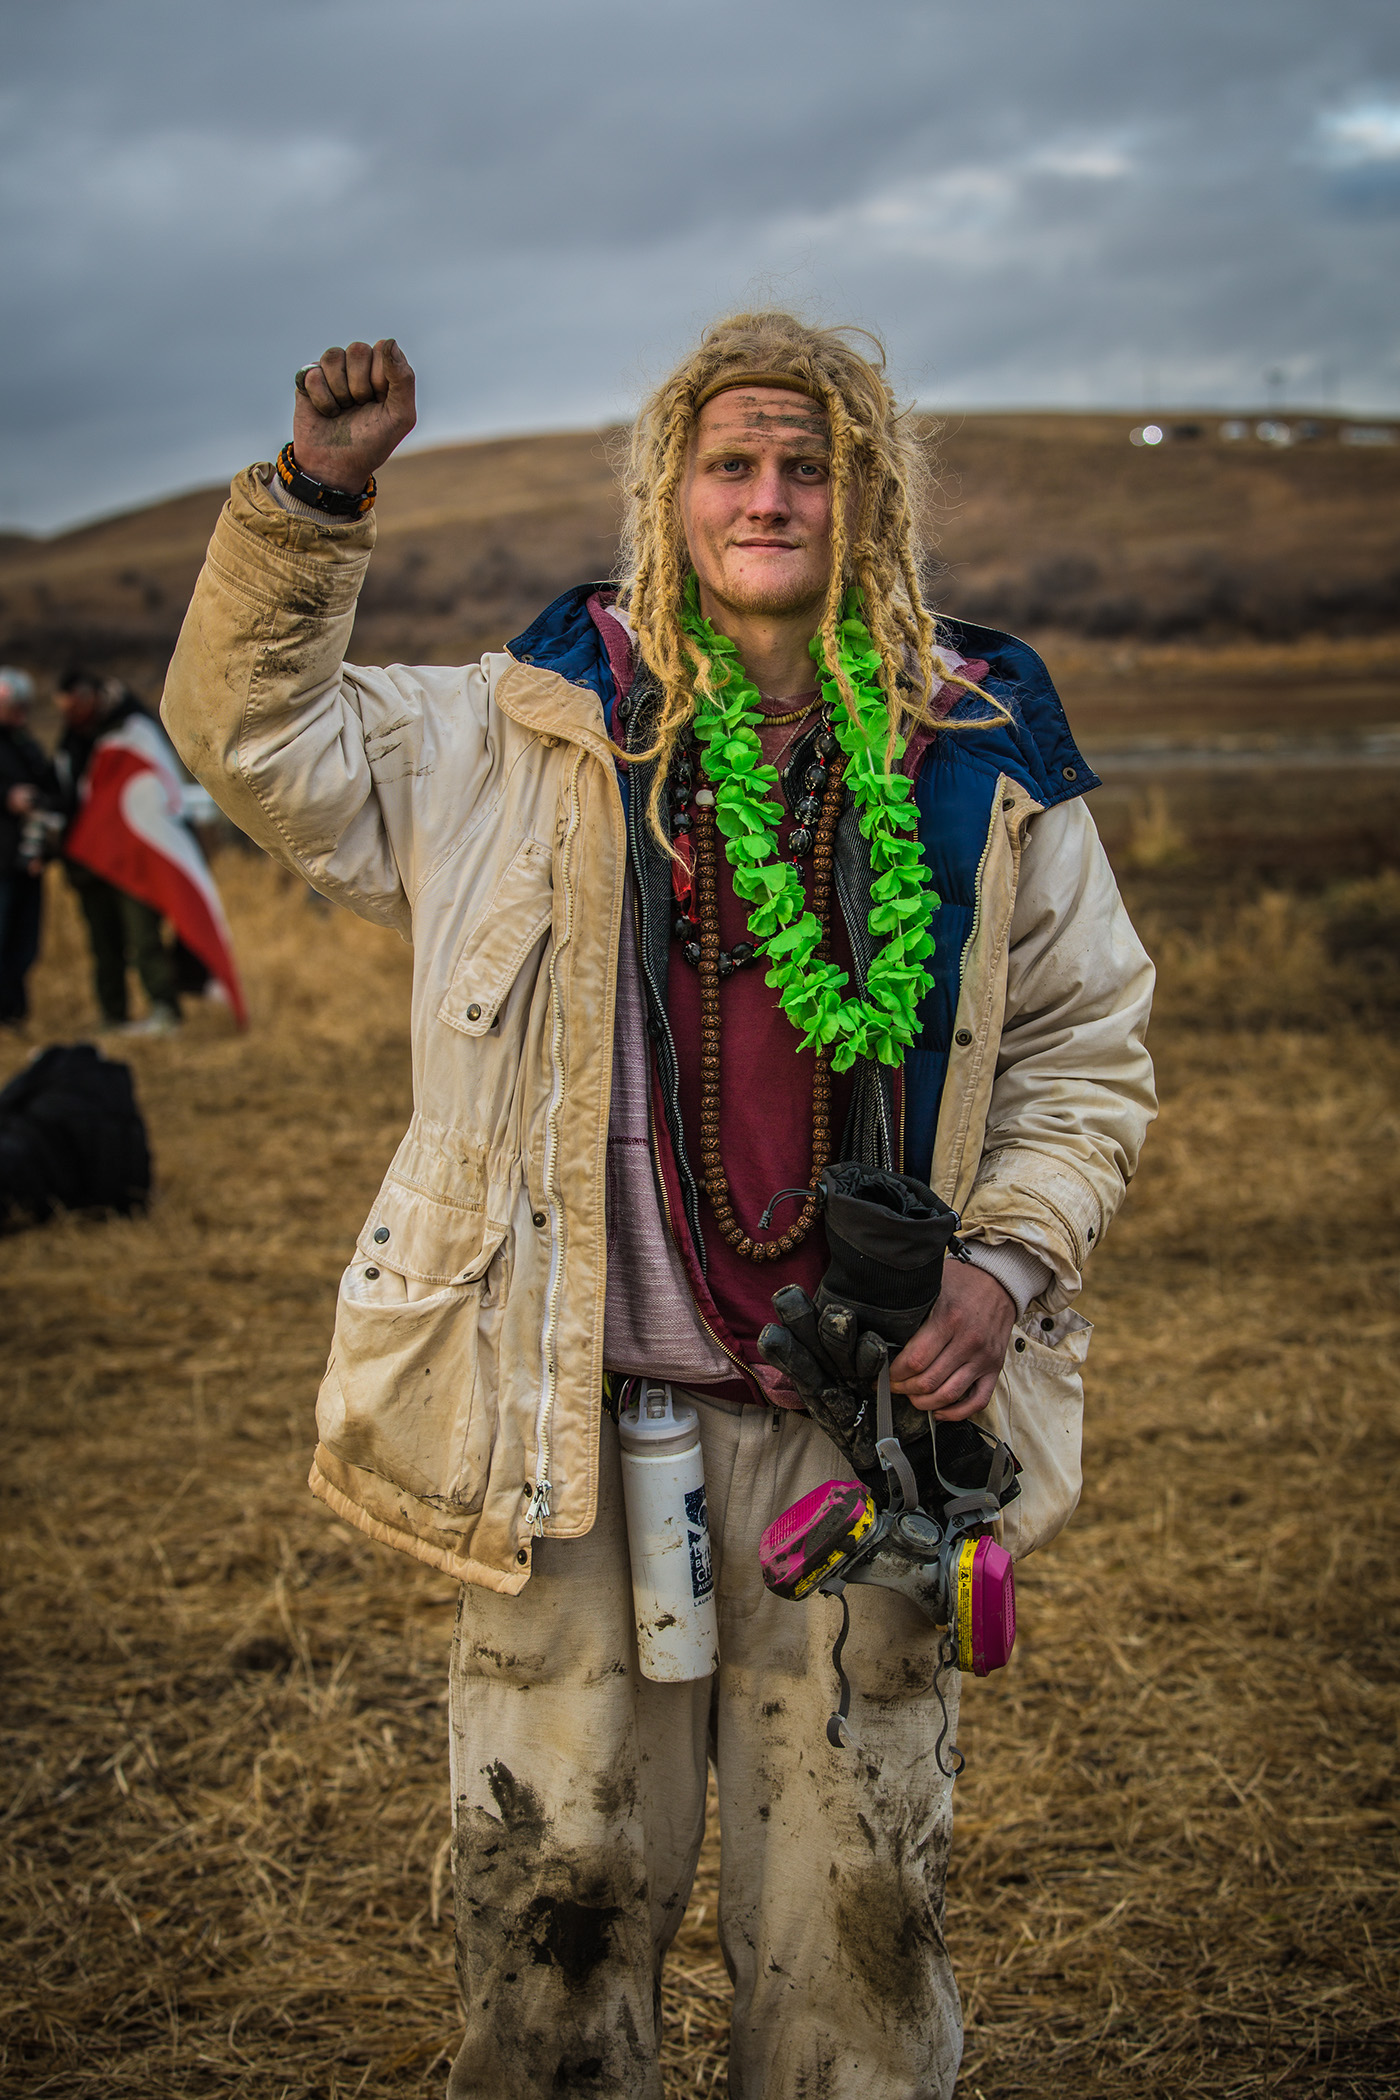 north dakota sioux pipeline cannon ball environmentalism photojournalism  exploration tribe native american activism